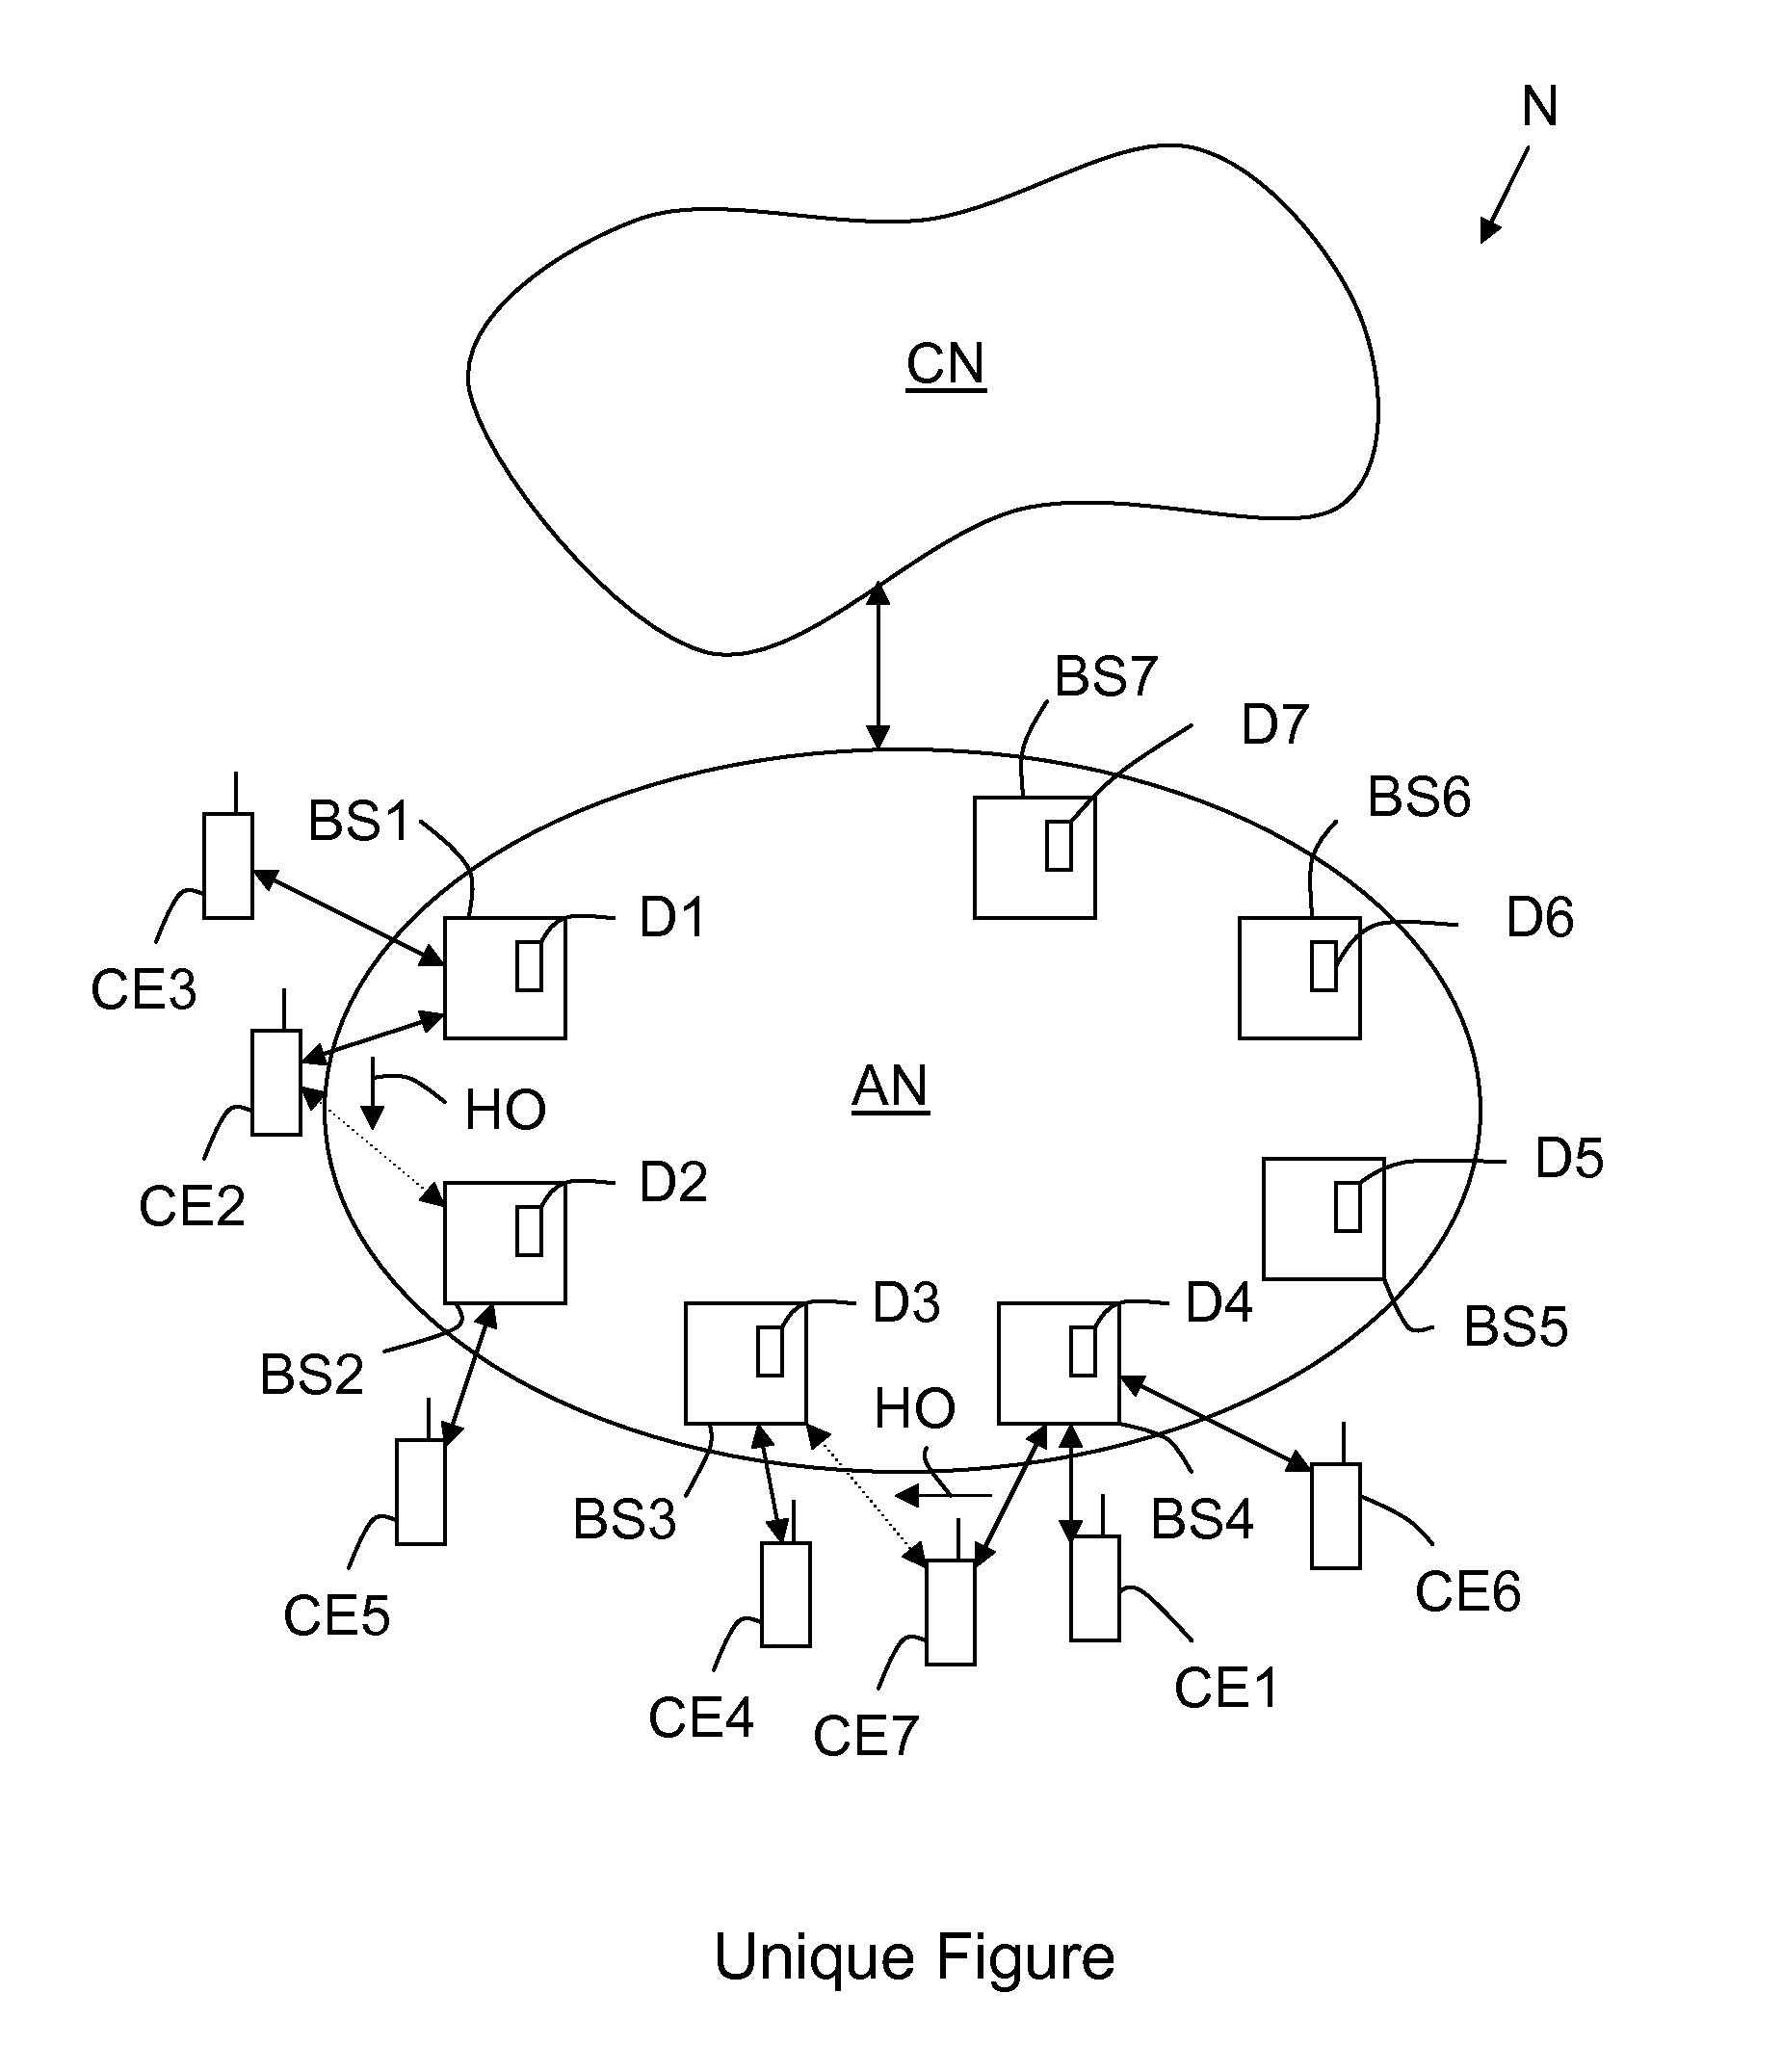 Multi-mode traffic engineered handover management device and method for a broadband wireless access network